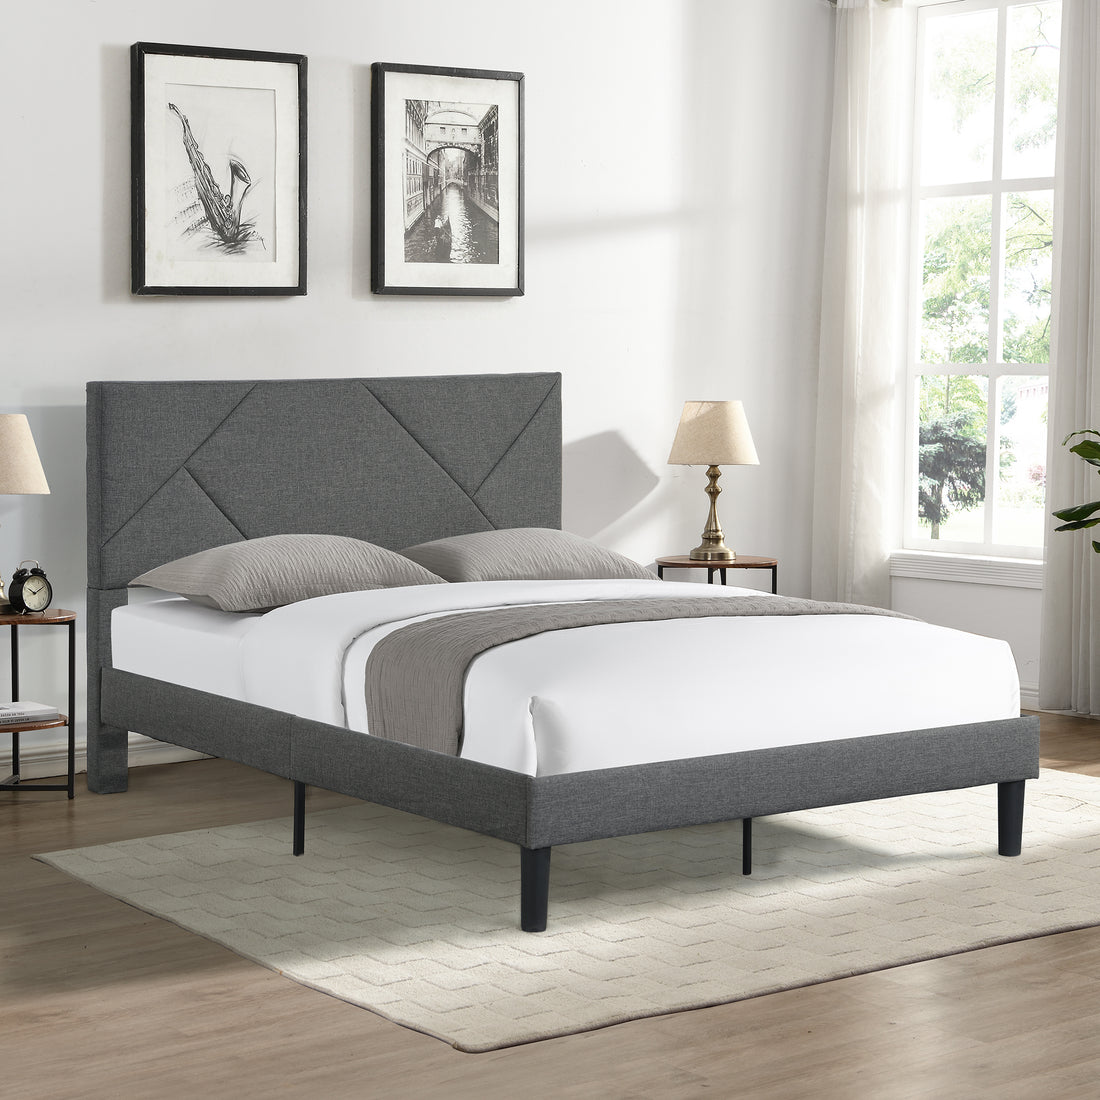 Queen Size Upholstered Platform Bed Frame with gray-fabric